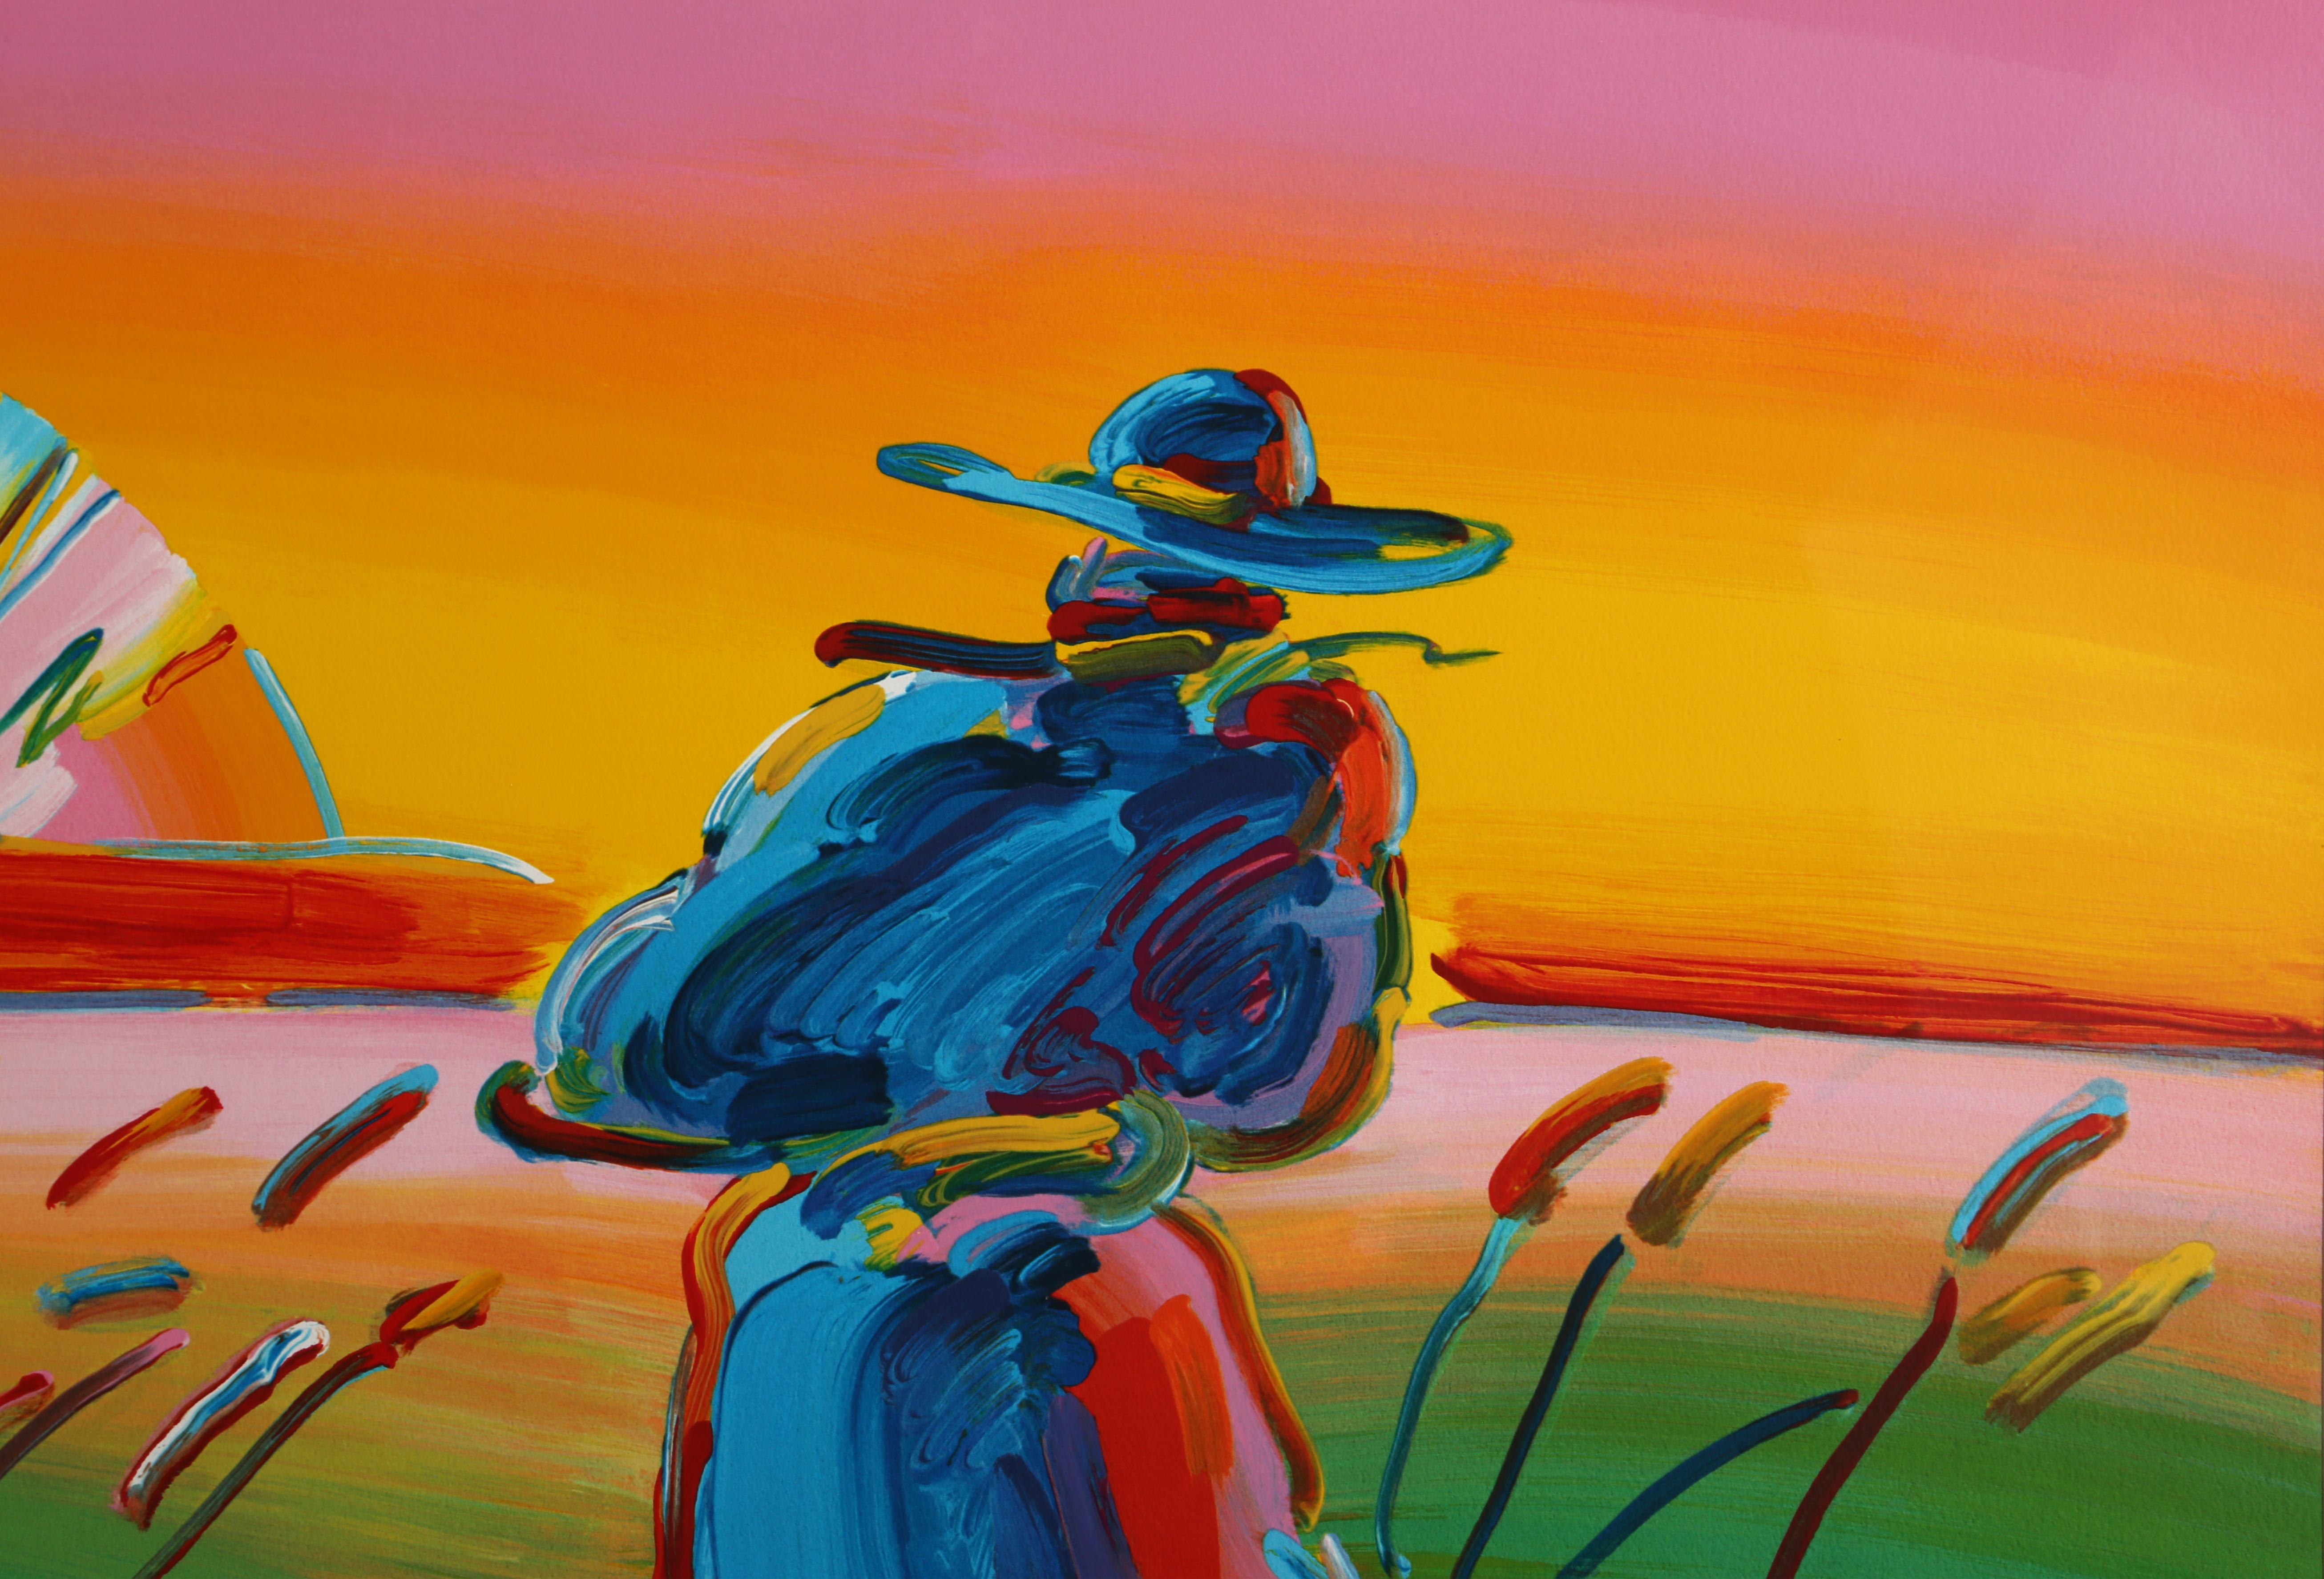 Walking in the Reeds - Print by Peter Max